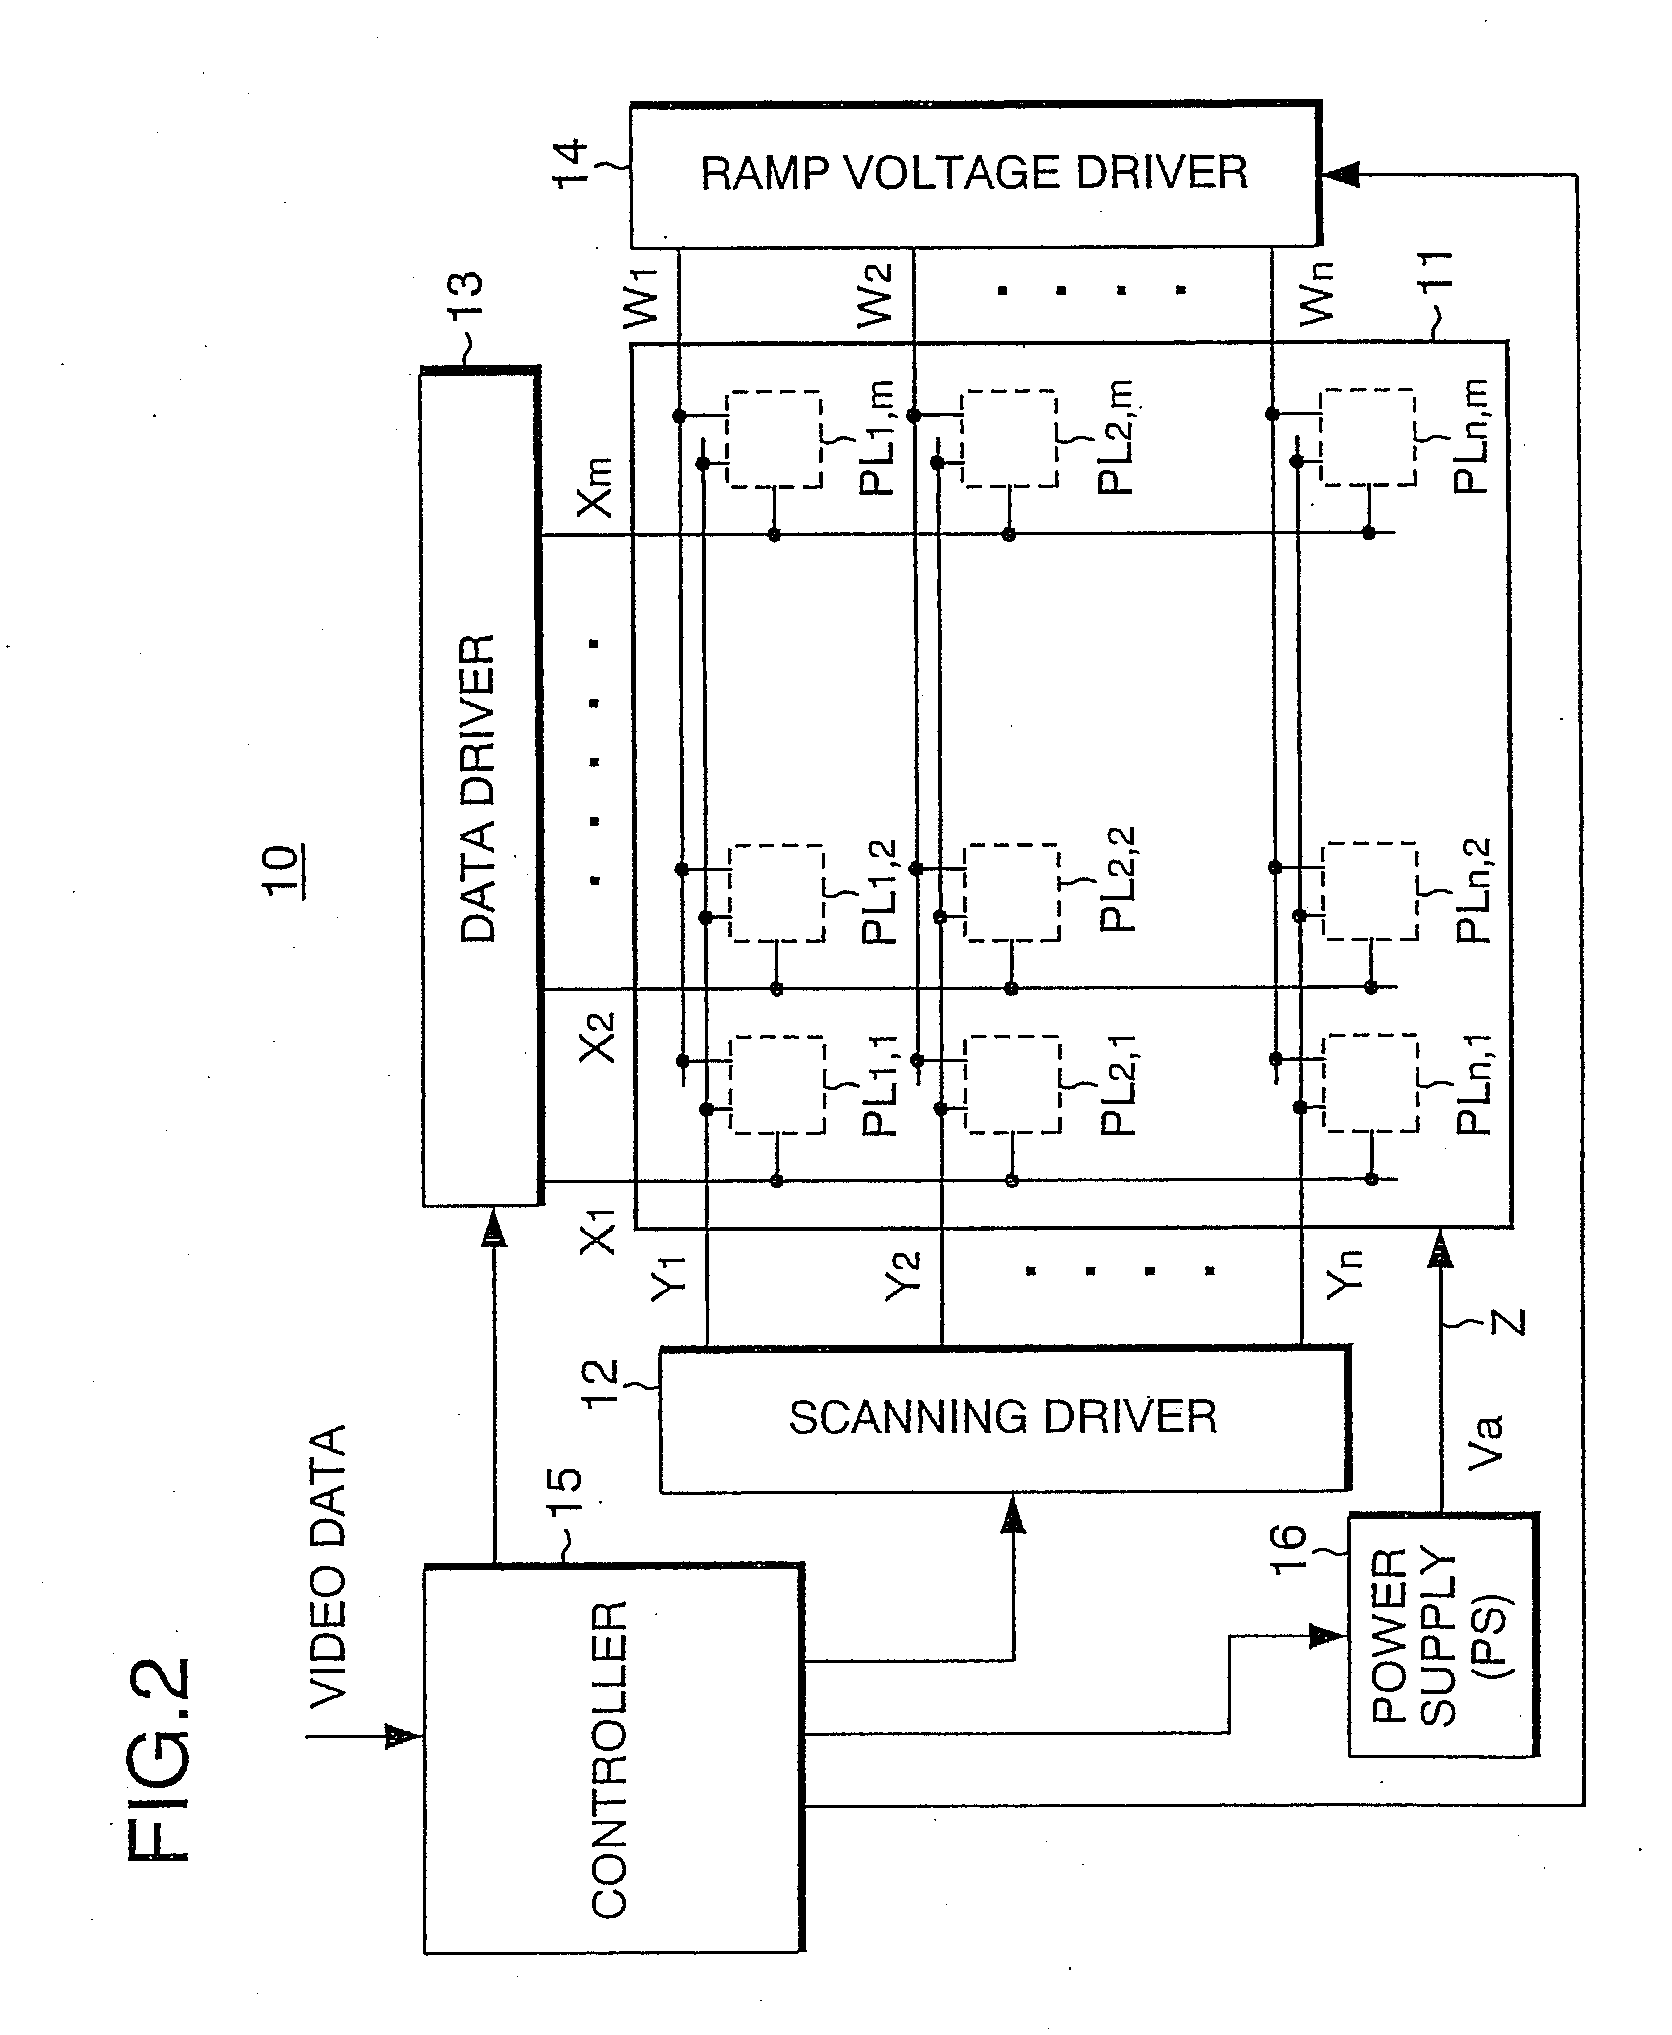 Active matrix display apparatus and driving method therefor